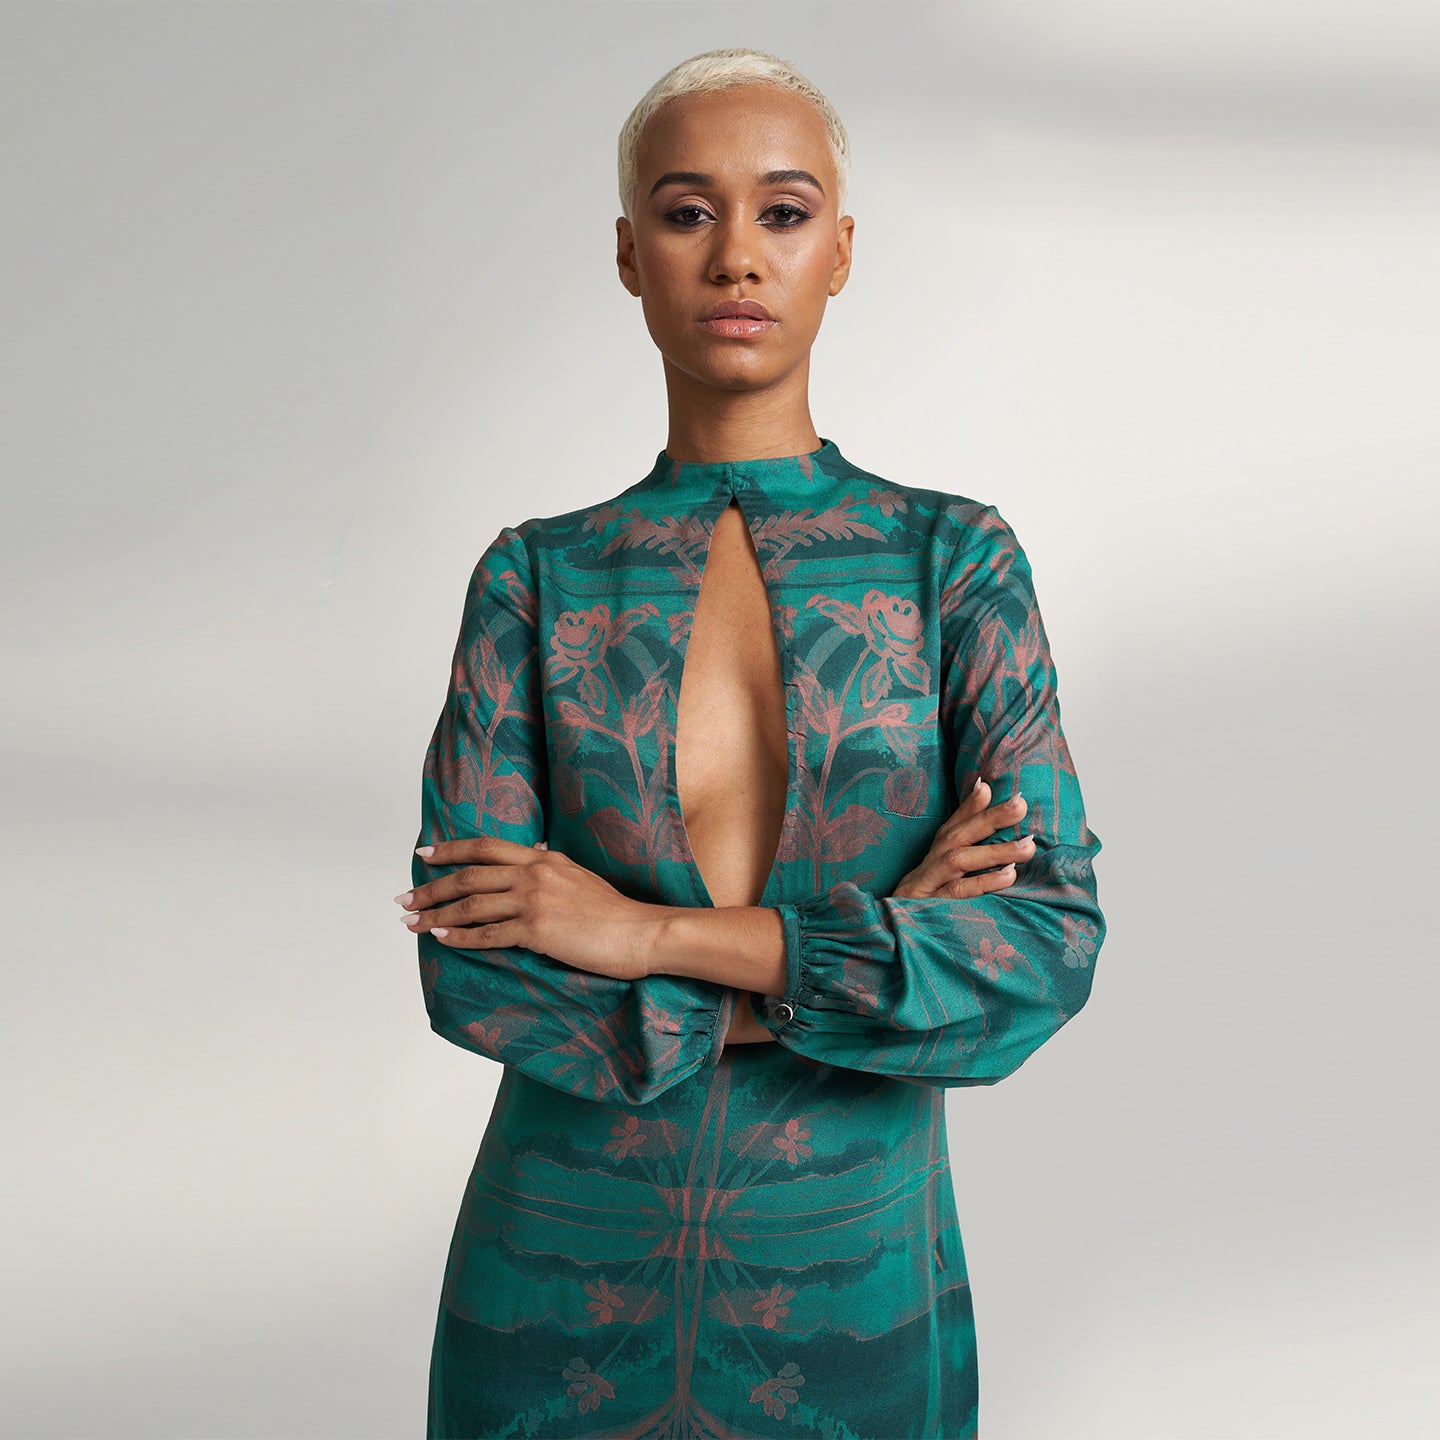 A global small size model wearing a shirt dress printed with hues of green and peach crafted in organic lotus stem silk fabric with a deep front slit neckline and gathered sleeves. the dress is printed with non toxic Gots certified inks. 